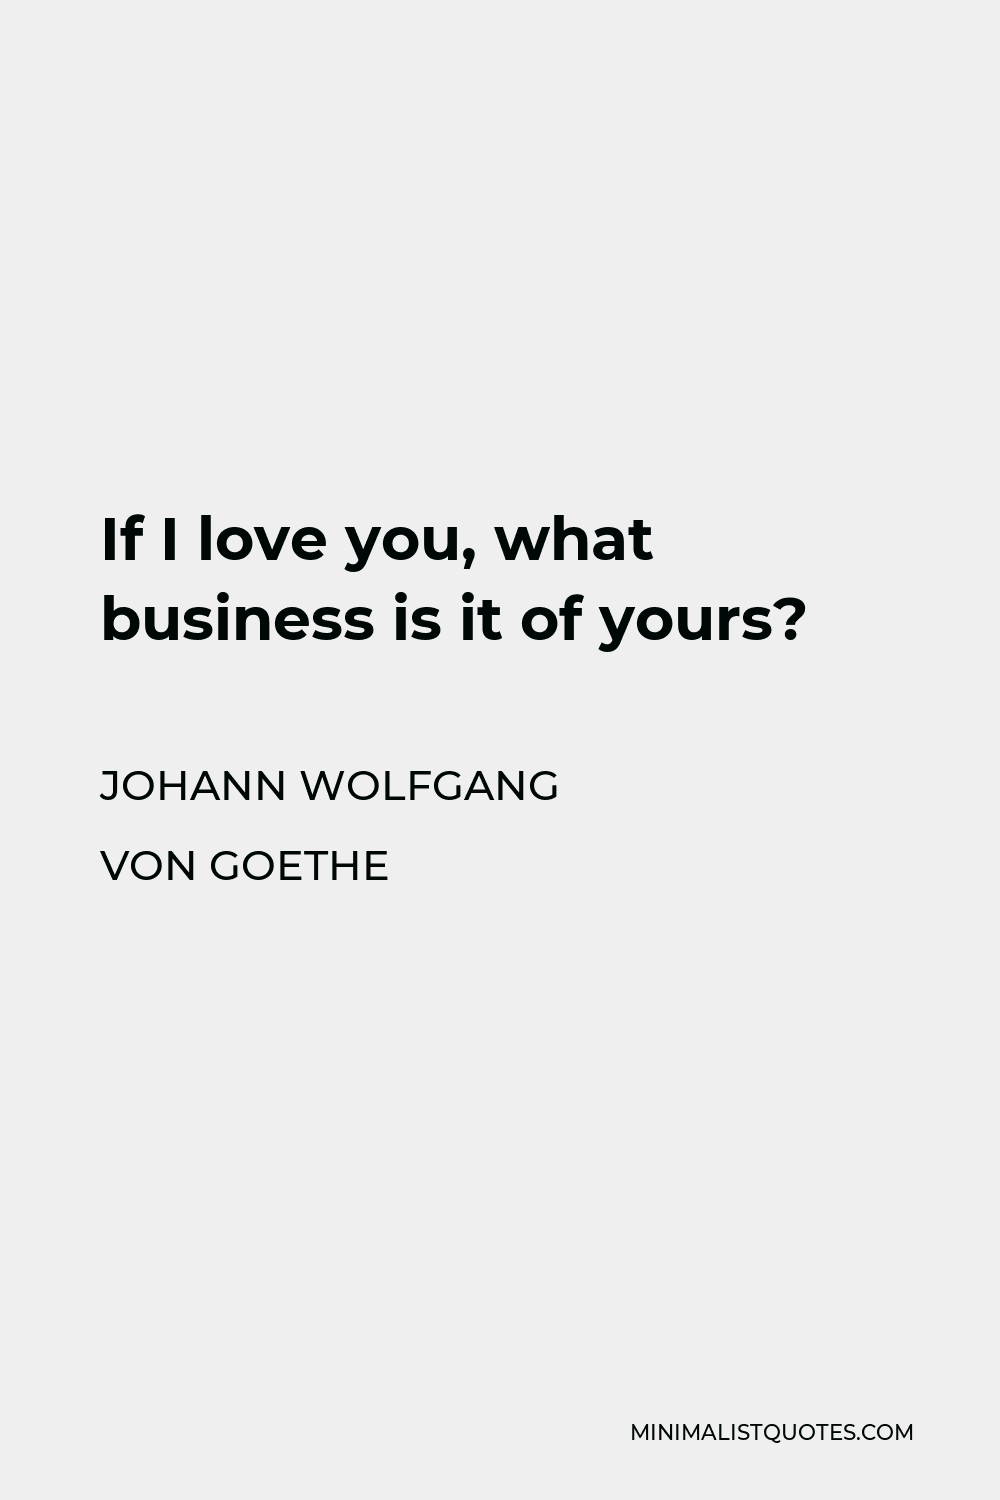 Johann Wolfgang von Goethe Quote - If I love you, what business is it of yours?